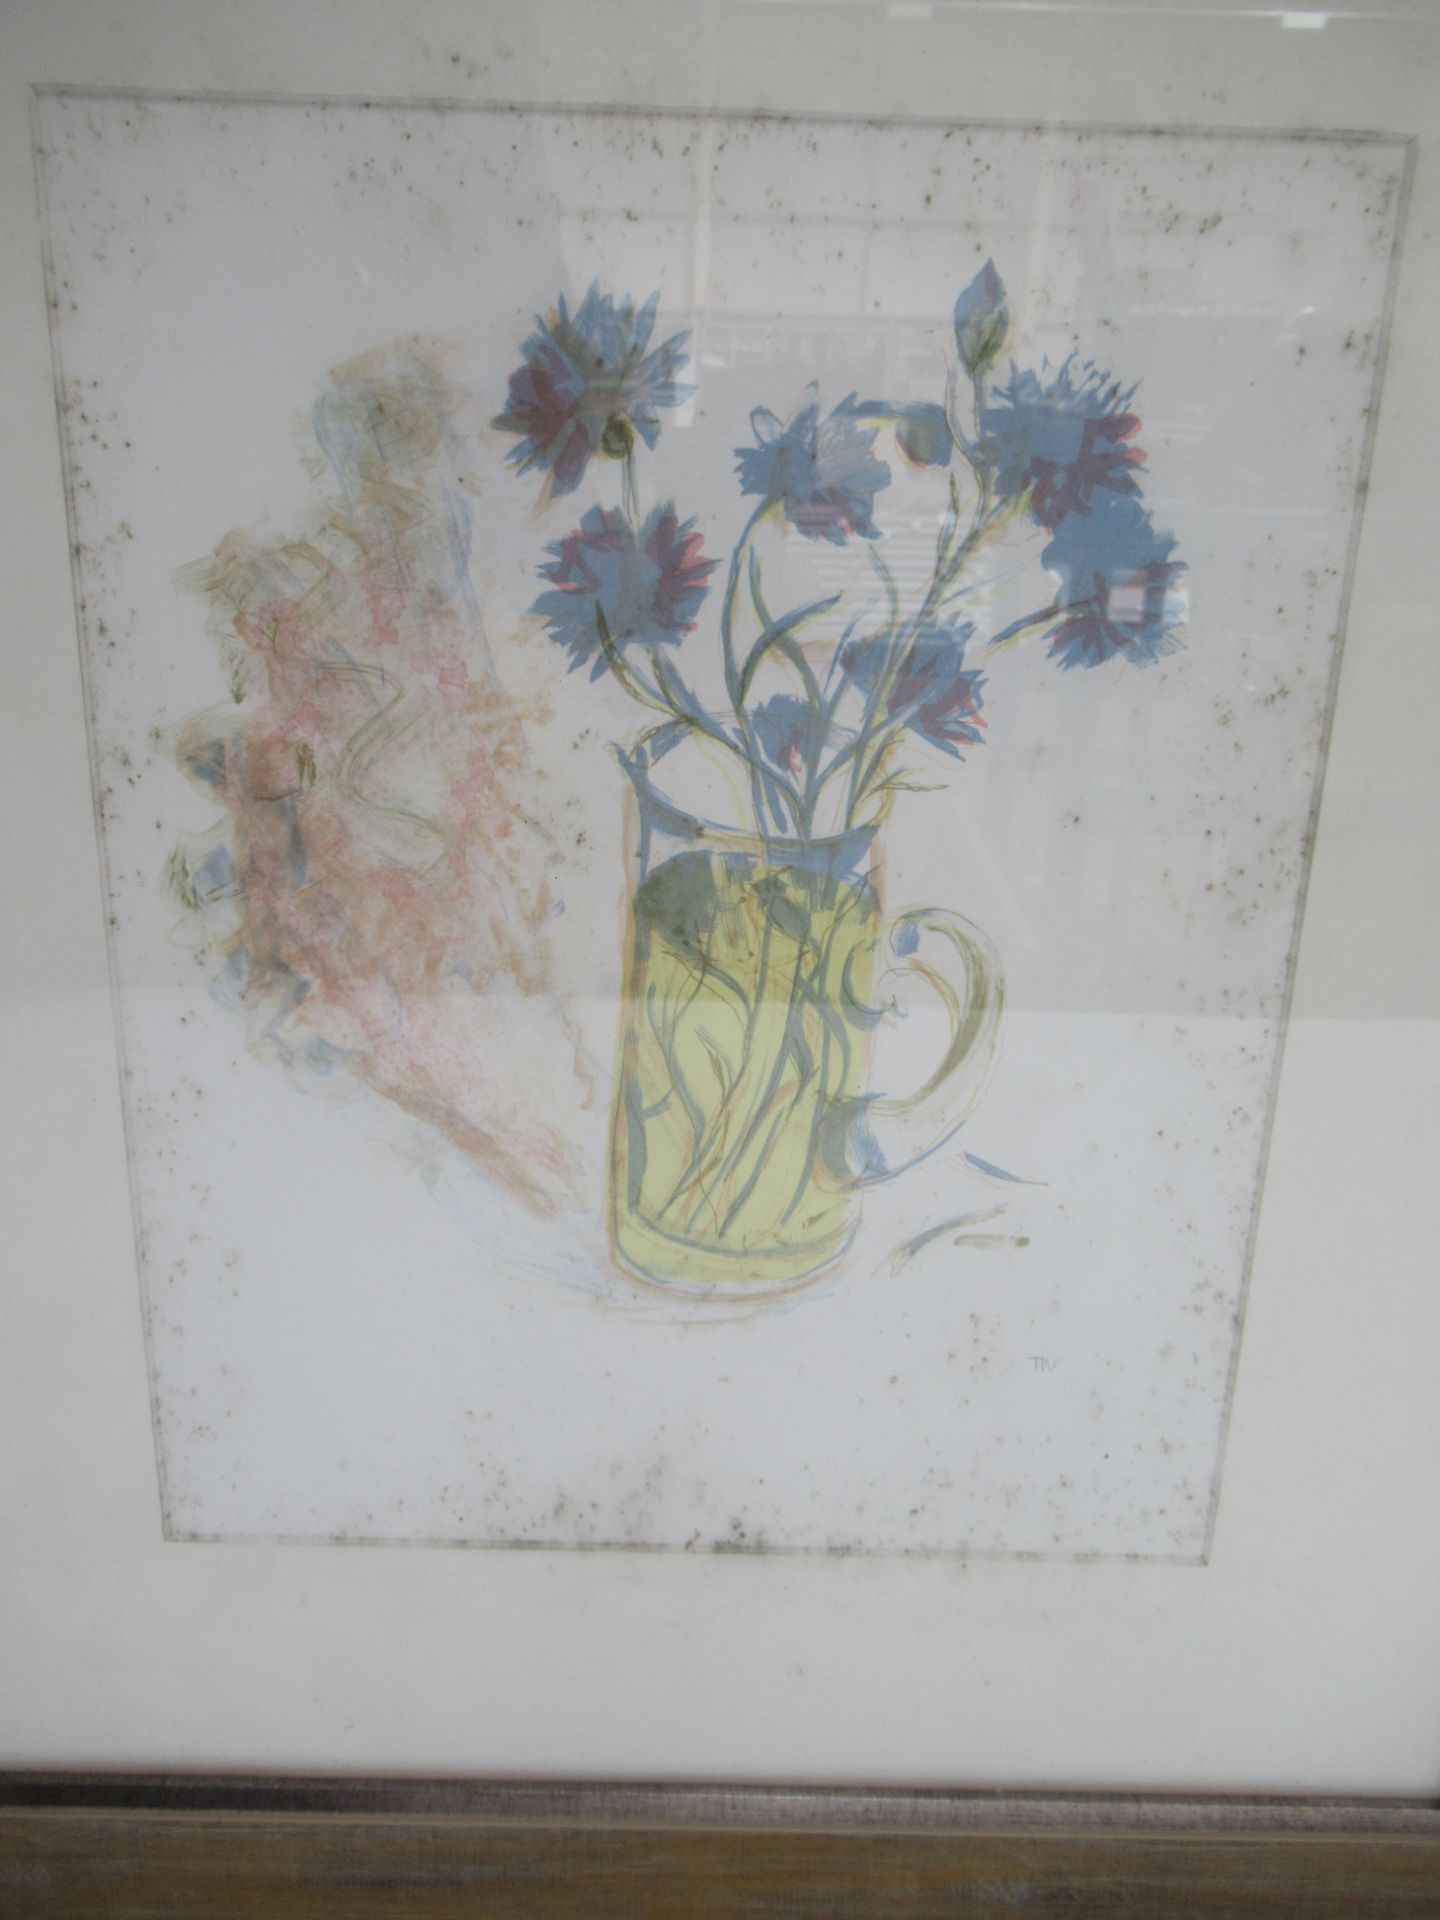 5x Tessa Newcomb Lithographs - sizes vary - Image 3 of 29